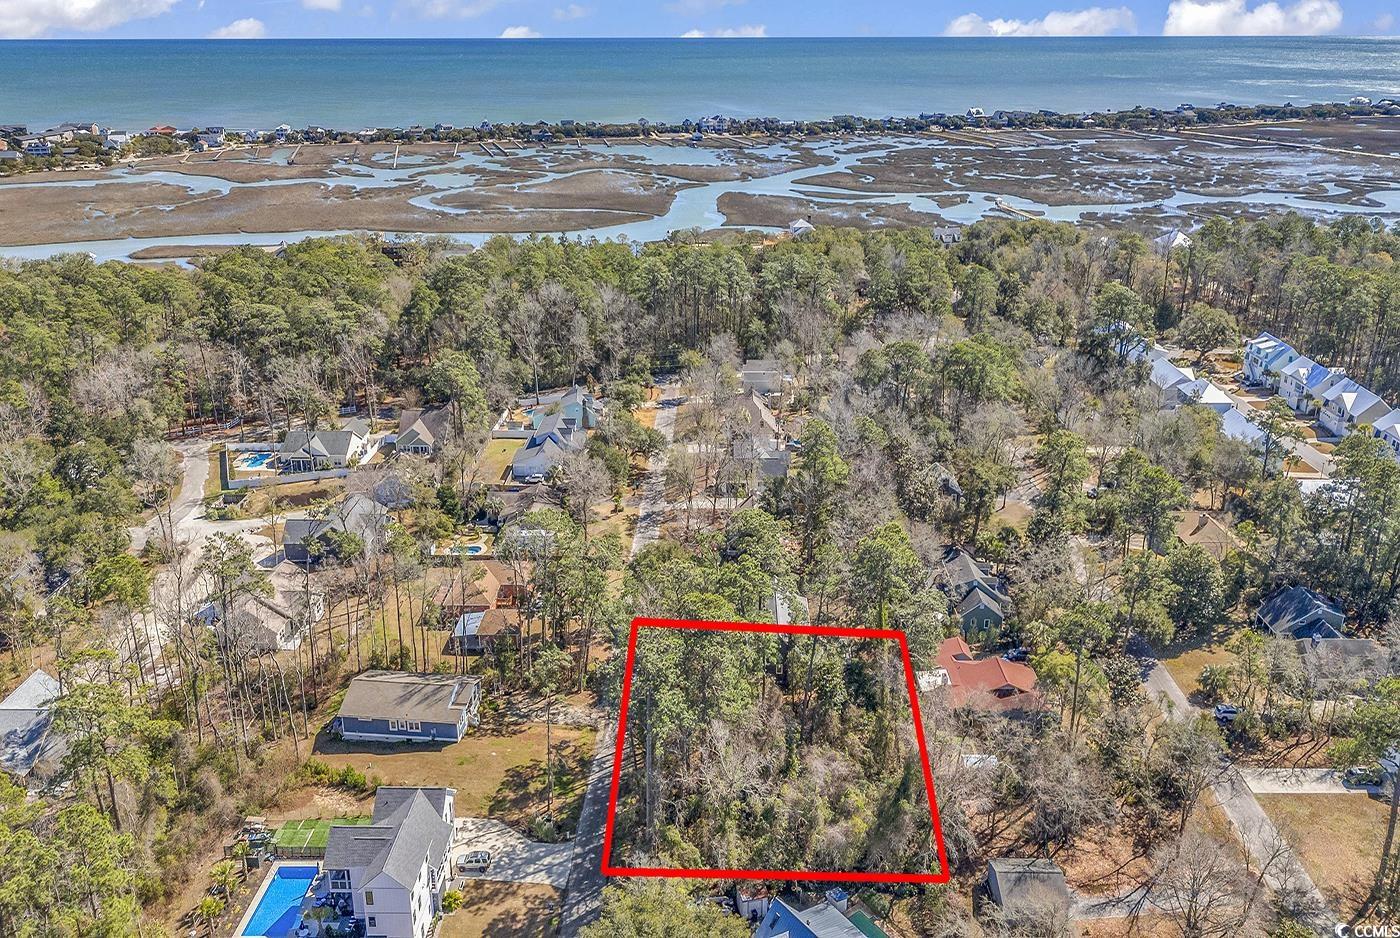 nestled within the charming coastal community of pawleys island, this rare offering presents an exceptional opportunity to own your own slice of lowcountry paradise. boasting approximately 0.34 acres of pristine, untouched land, this property provides a canvas for your dreams of coastal living to come to life. just a stone's throw away from the sandy shores of pawleys island, enjoy effortless access to sun, surf, and relaxation. spend your days strolling along pristine beaches or soaking up the warm carolina sunshine. despite its secluded feel, this property is conveniently located near a wealth of amenities, including shopping, dining, and entertainment options. explore the unique boutiques and eateries of pawleys island or venture further afield to nearby attractions. situated within close proximity to major highways and thoroughfares, this property offers easy access to neighboring towns and cities. whether you're heading to myrtle beach for a day of excitement or charleston for a taste of history, the possibilities are endless.